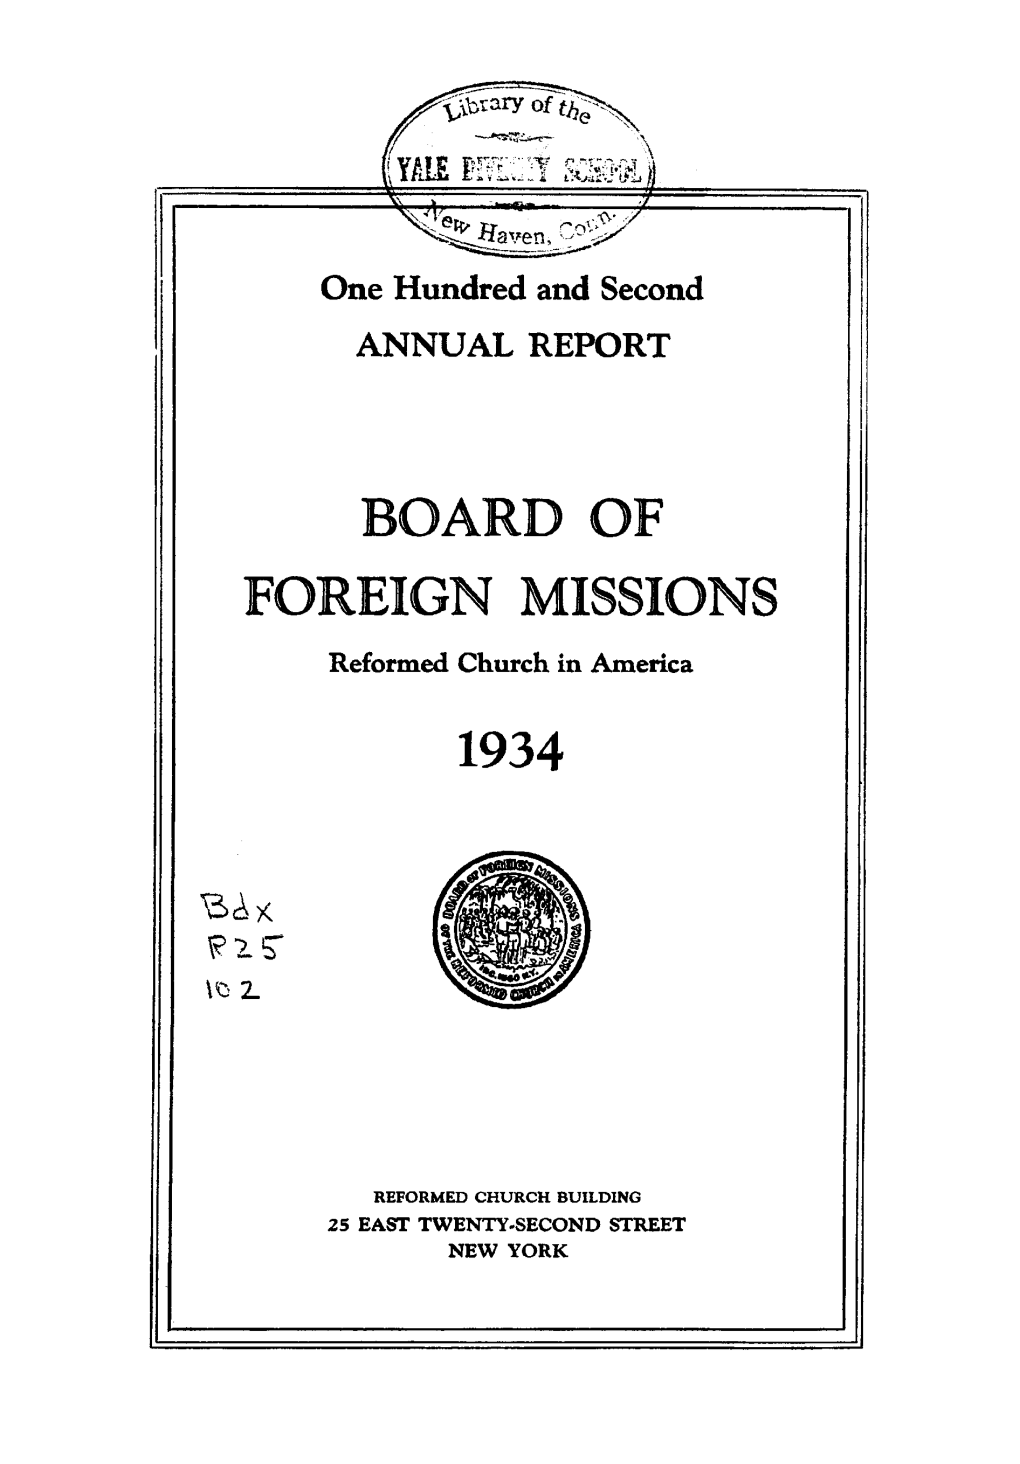 Board of Foreign Missions 1934